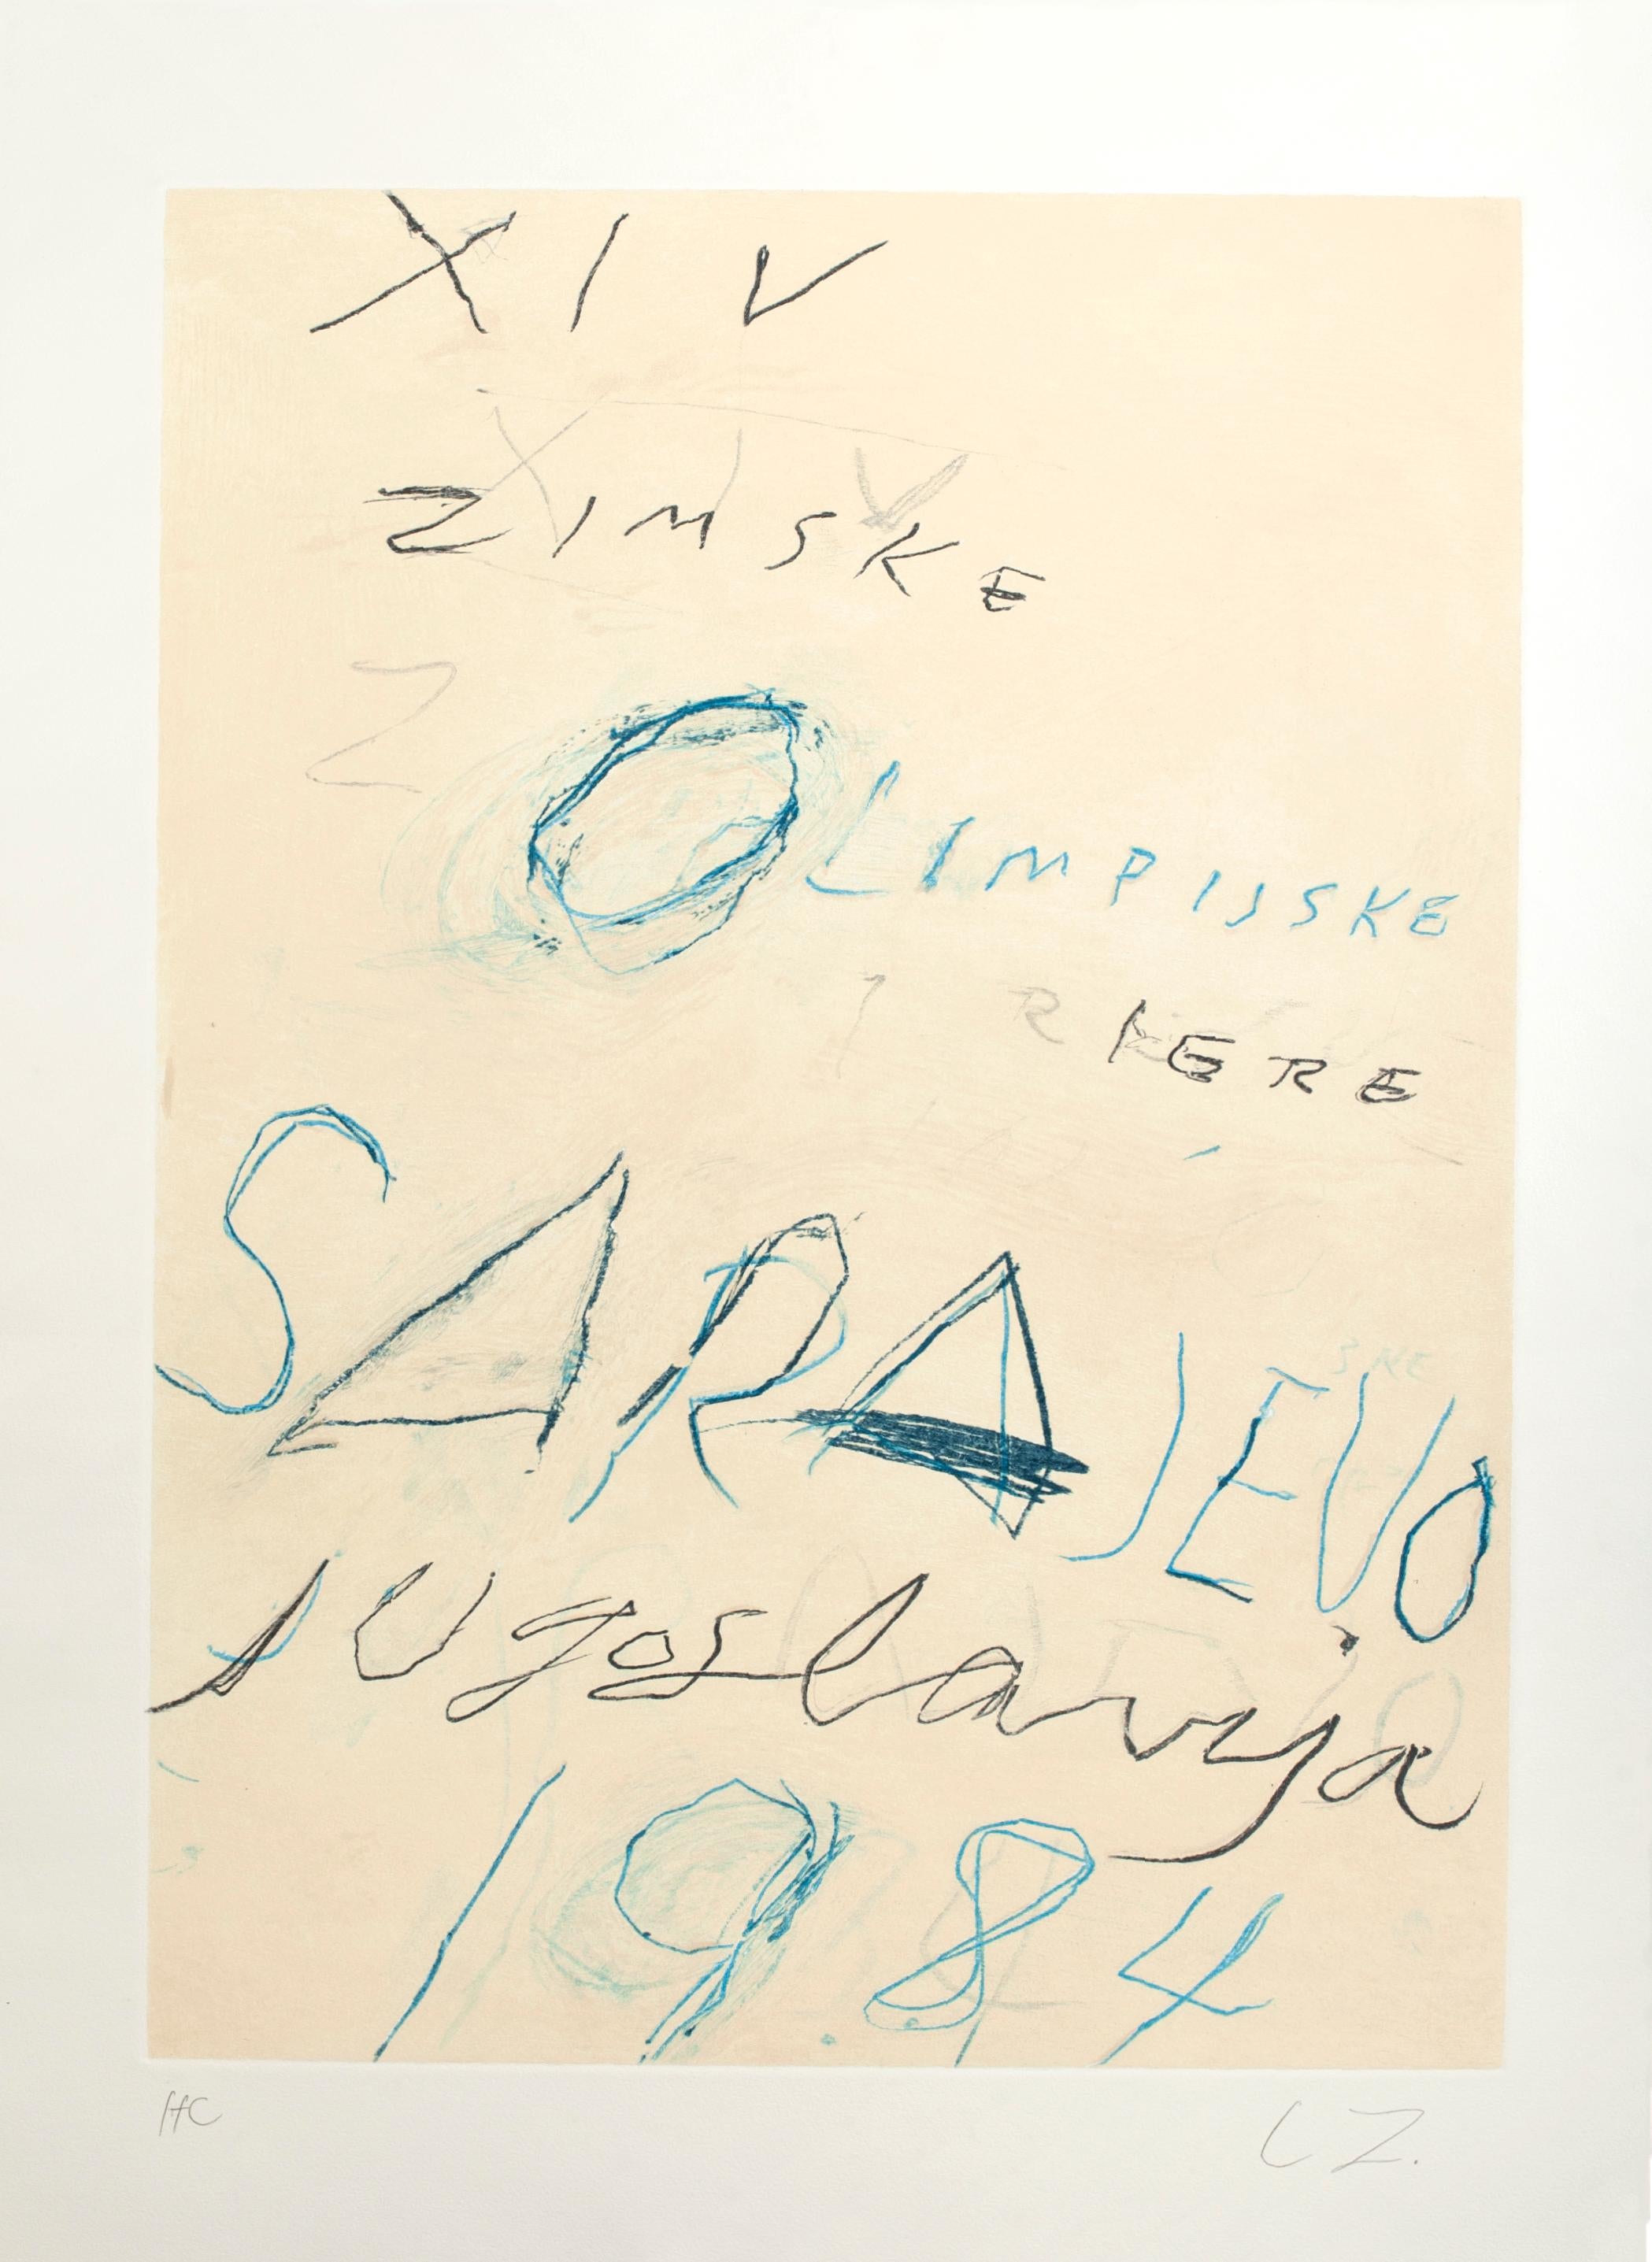 Untitled, Sarayevo Winter Olympic Games 1984, is an etching with aquatint and lithograph in colors realized by Cy Twombly on the occasion of the Winter Olympics Games 1984 in Sarajevo. 
Realized on White Arches Paper.
Image dimensions: 75.3x54.7